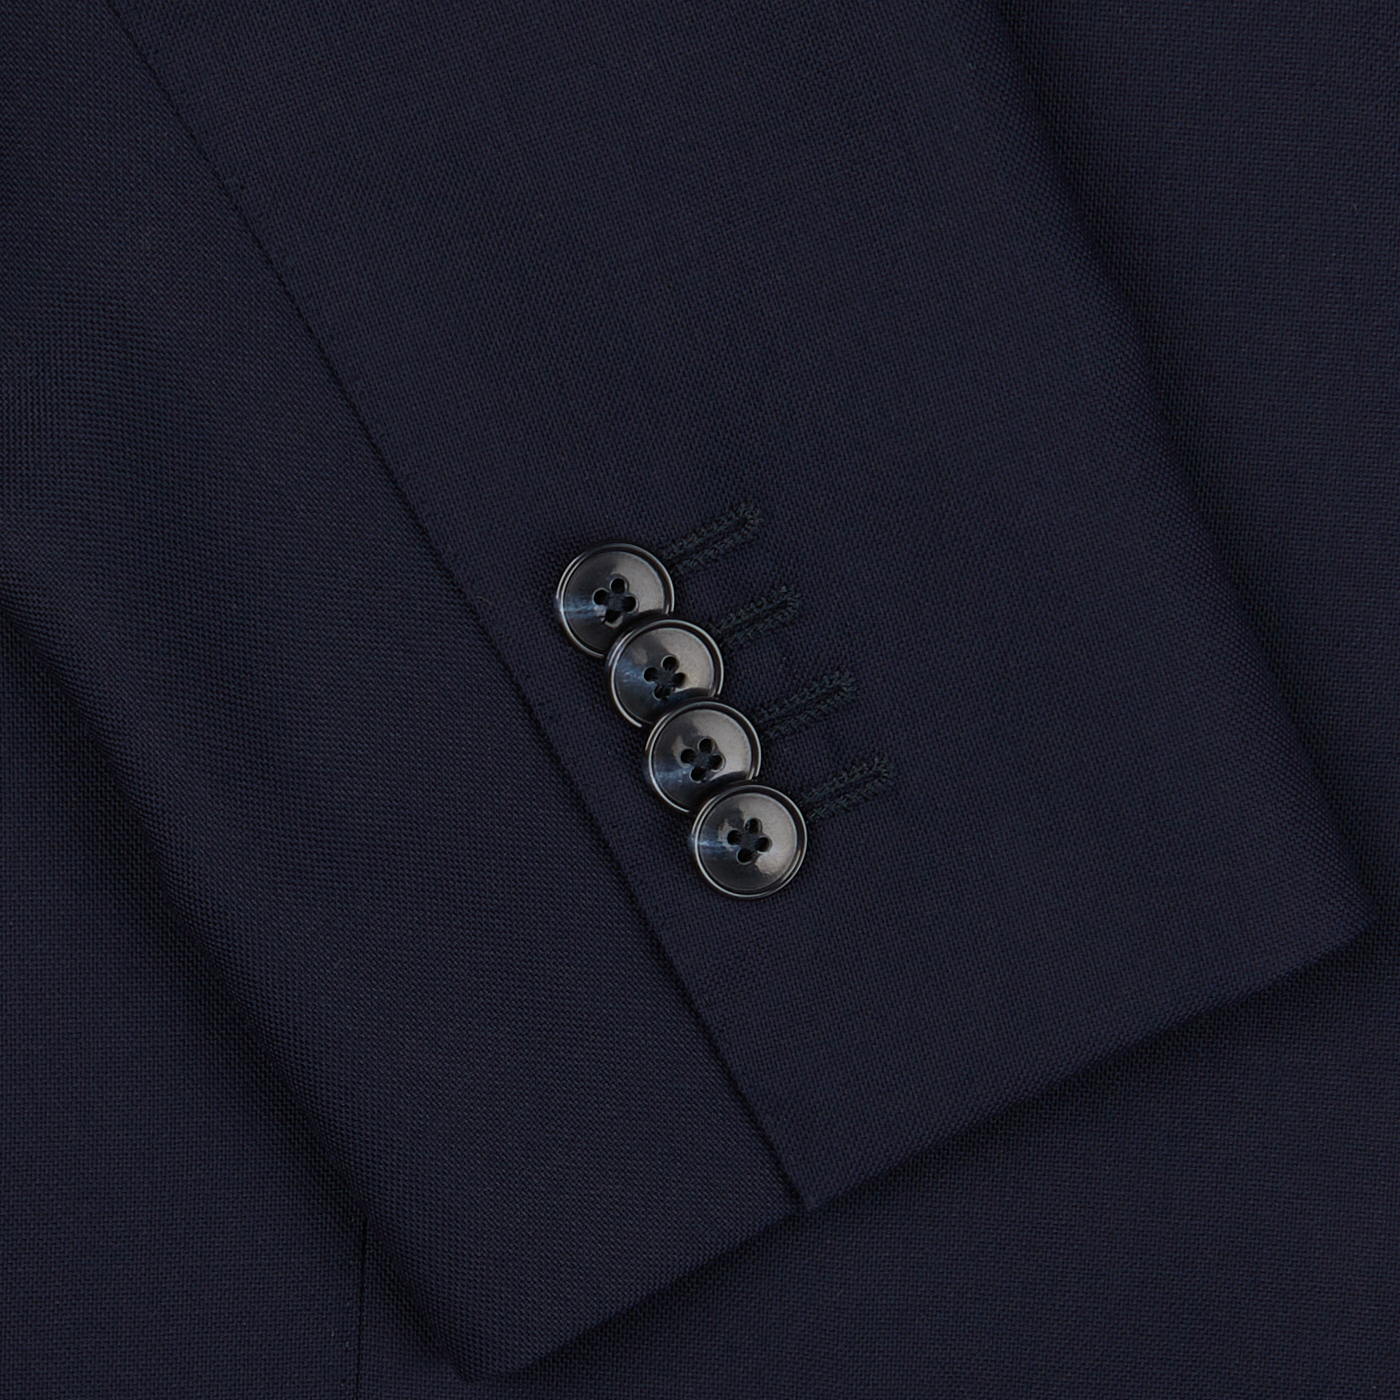 Close-up of a Baltzar Sartorial Navy Blue Super 100s Wool DB Suit Jacket sleeve with four buttons detailed in a vertical line.